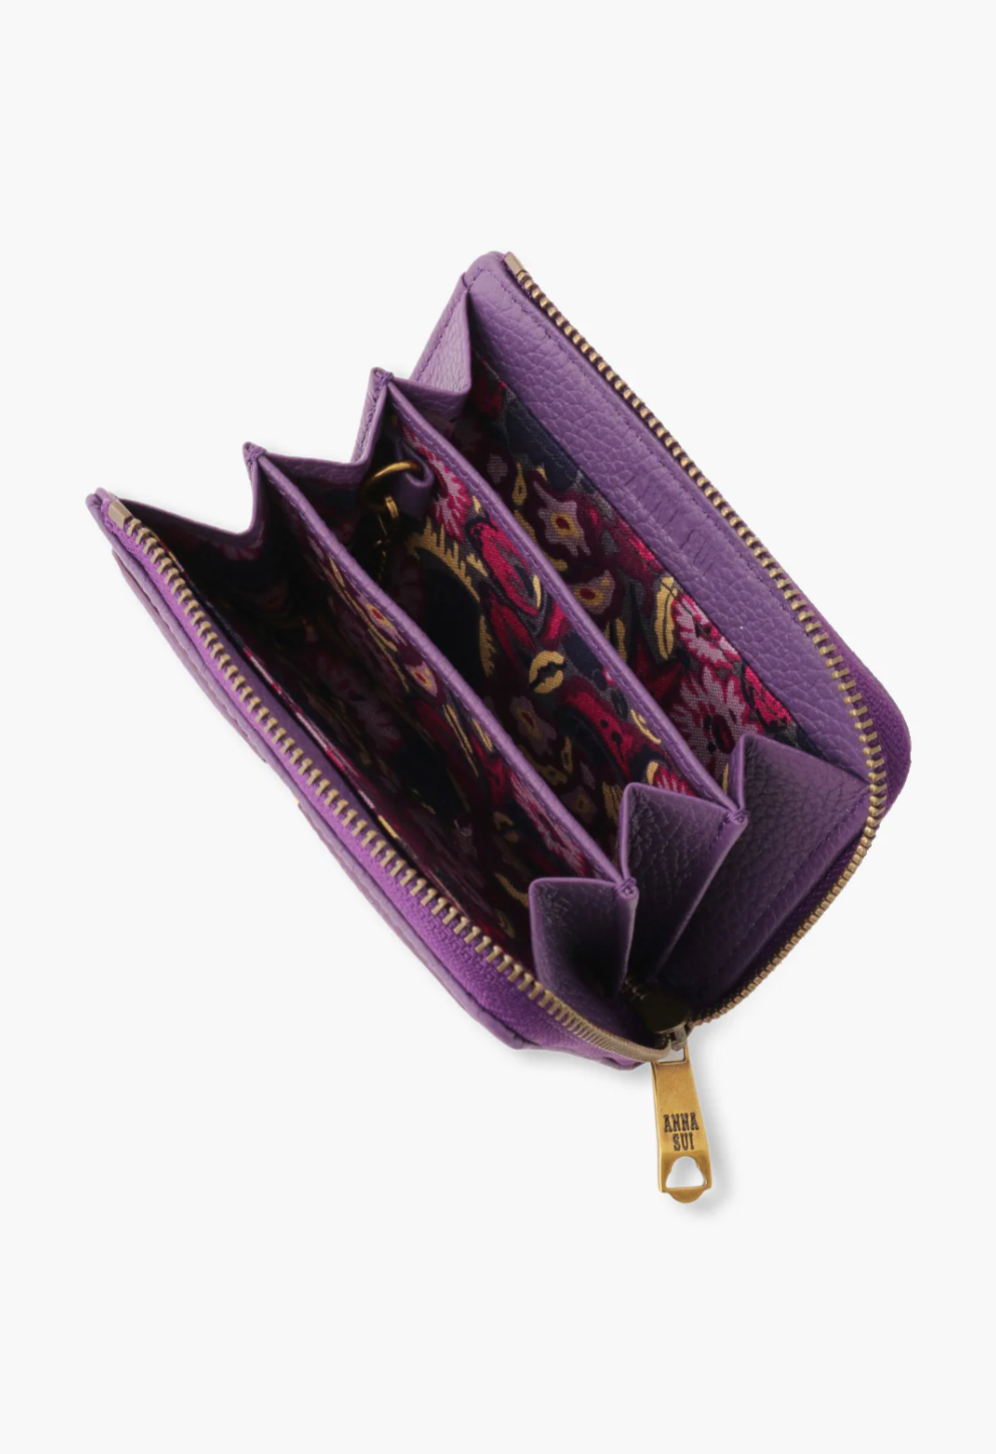 Nova Small Wallet purple, 5 card slots and 3 open compartments, floral fabric inside 